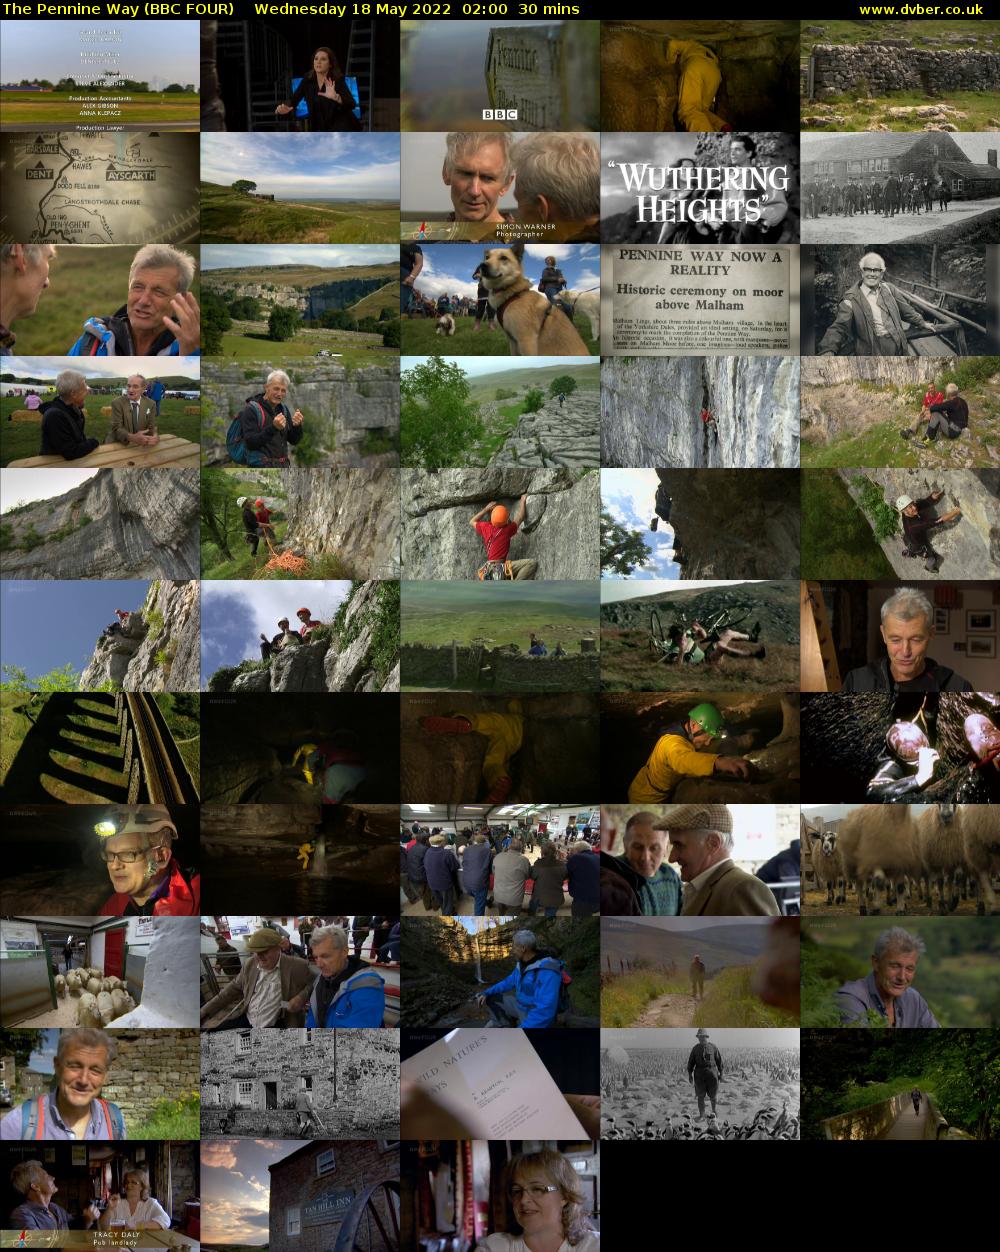 The Pennine Way (BBC FOUR) Wednesday 18 May 2022 02:00 - 02:30